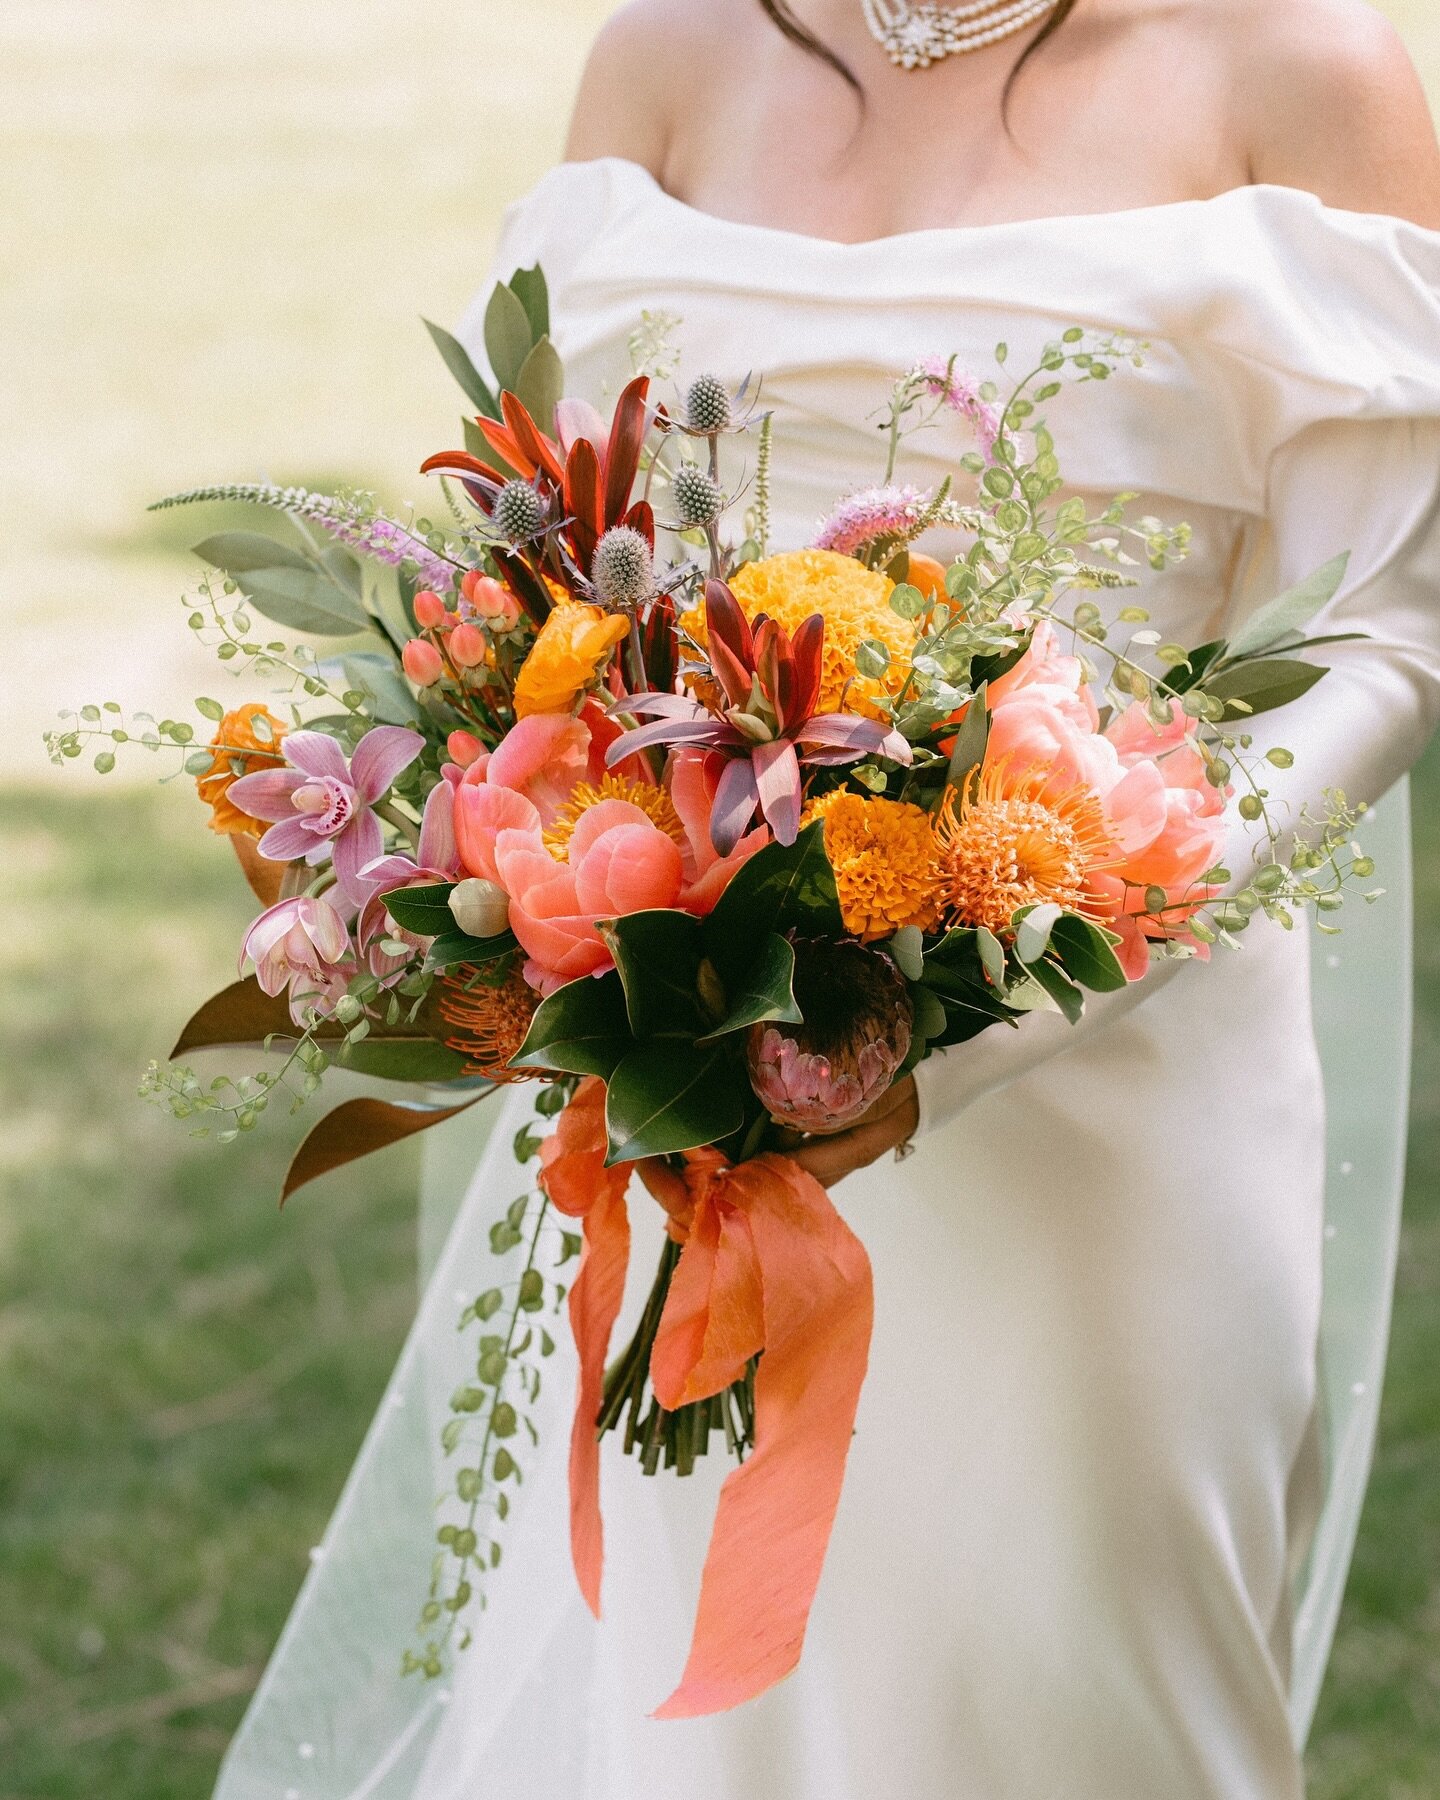 A moment for colorful, textural florals 🌸 

incredible bouquet by @posie_shoppe, second shot for @yasminkhajaviphotography 🧡 

#sunriveroregon #sunriverresort #sunriverwedding #destinationweddingphotographer #destination #destinationweddings #trave